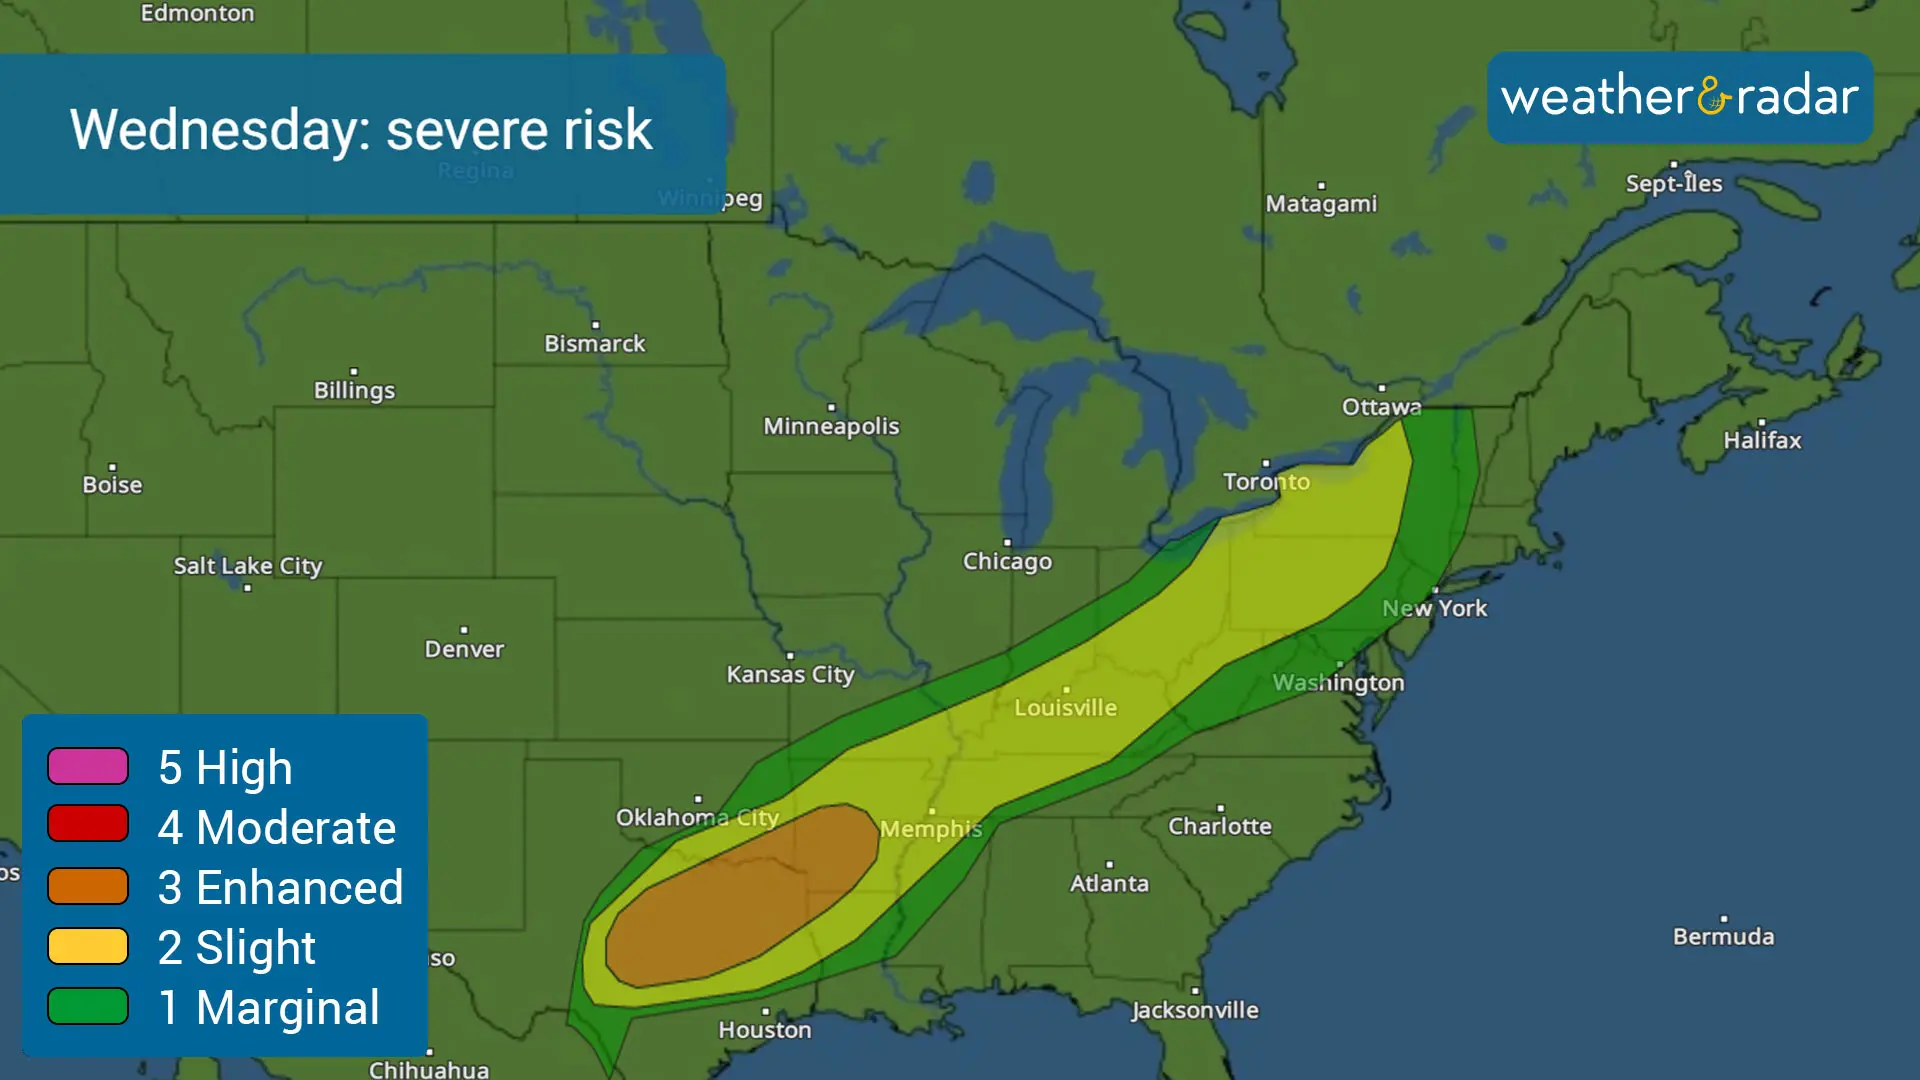 Severe weather risk for Wednesday